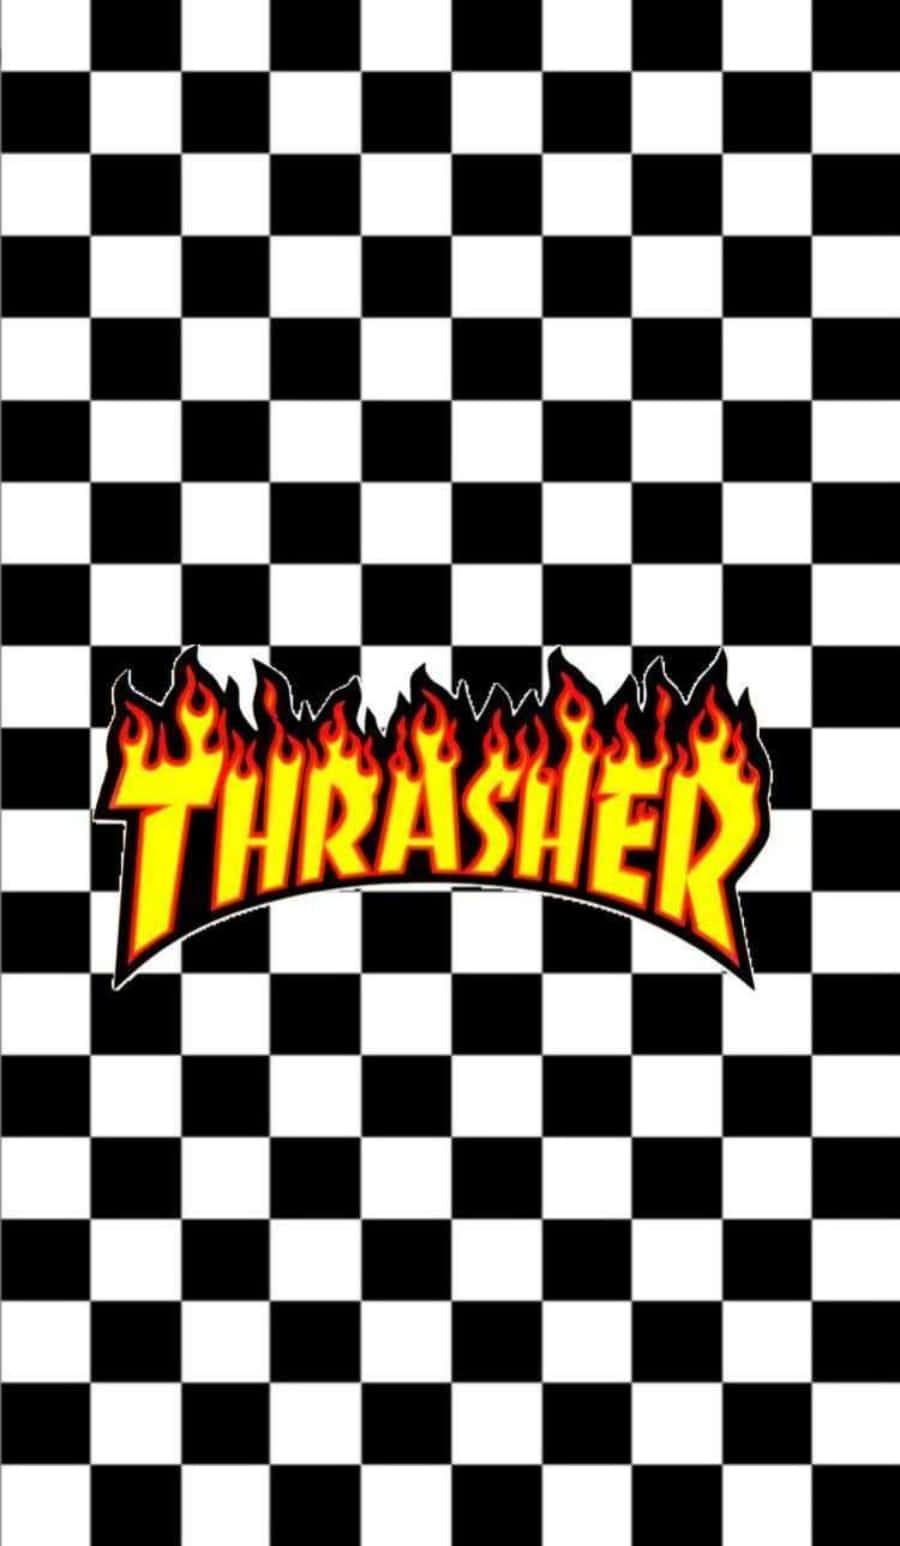 Thrasher - A Symbol of Streetstyle